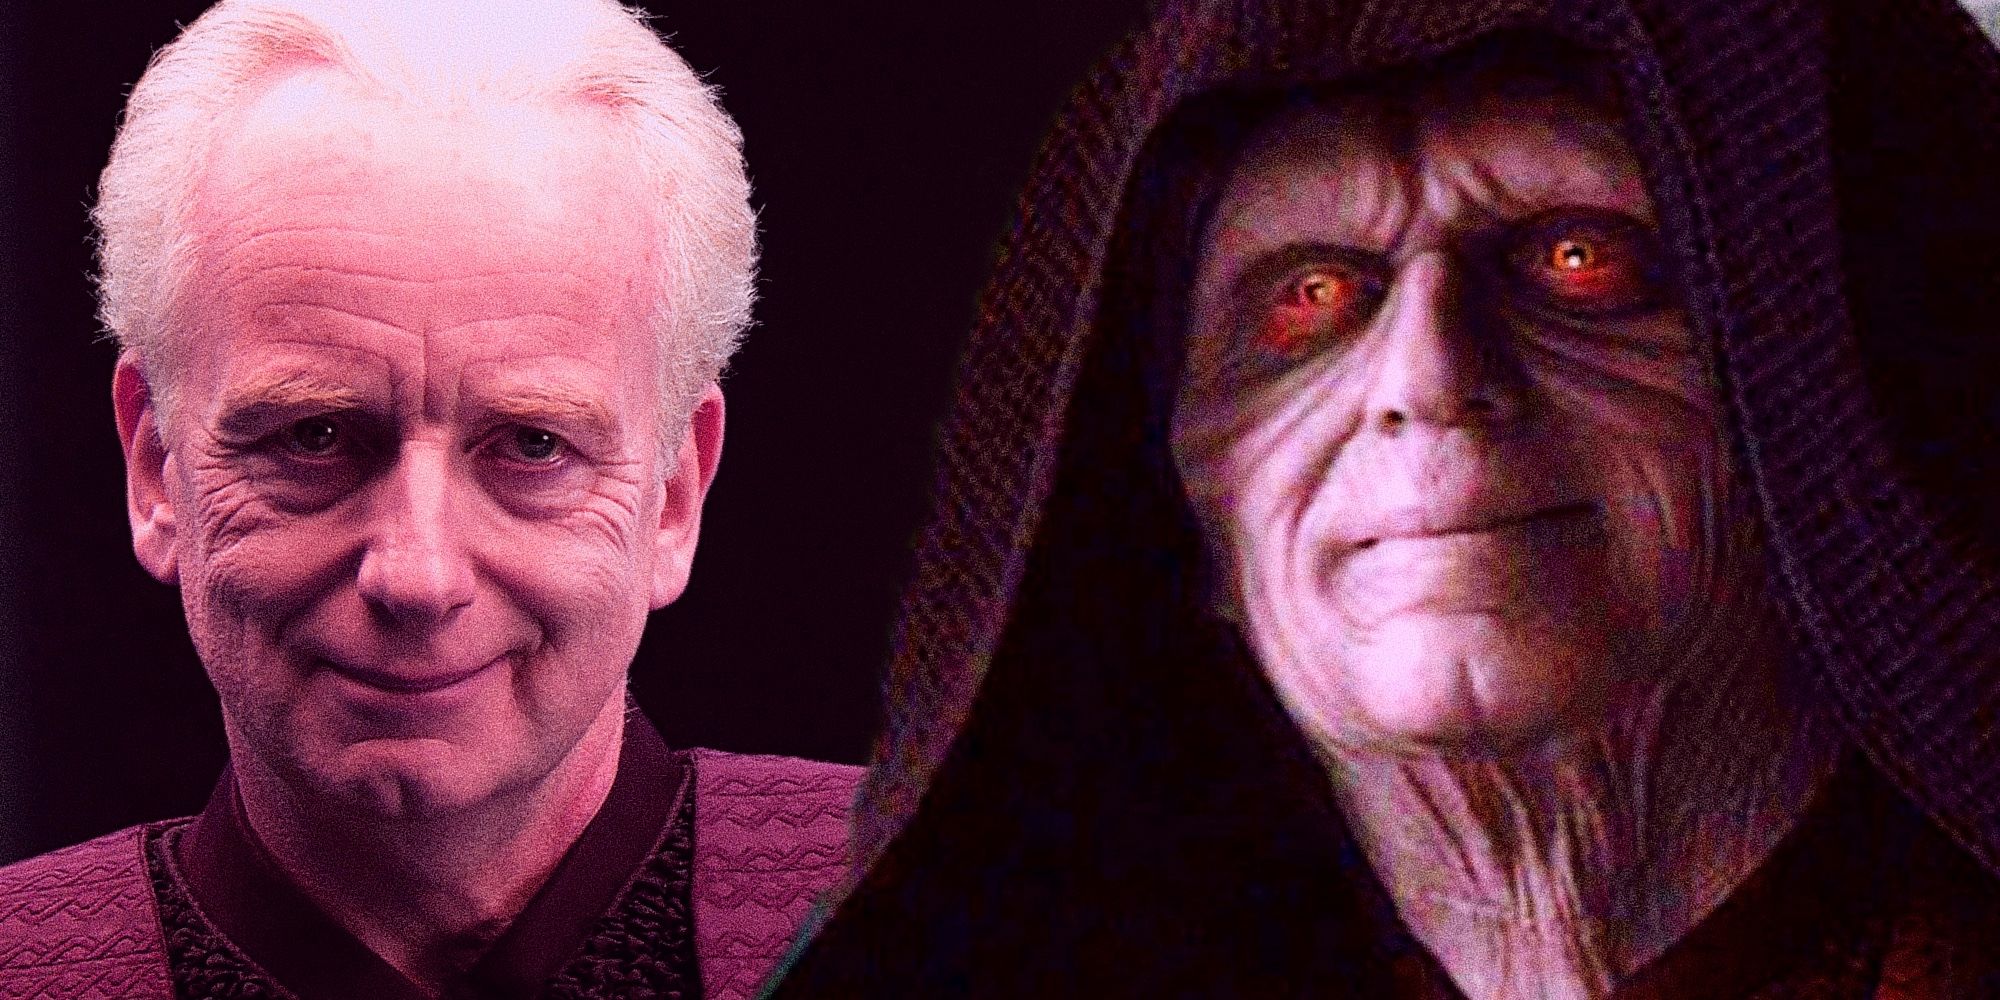 Palpatine's iconic smirk is shown next to his equally iconic Emperor appearance.